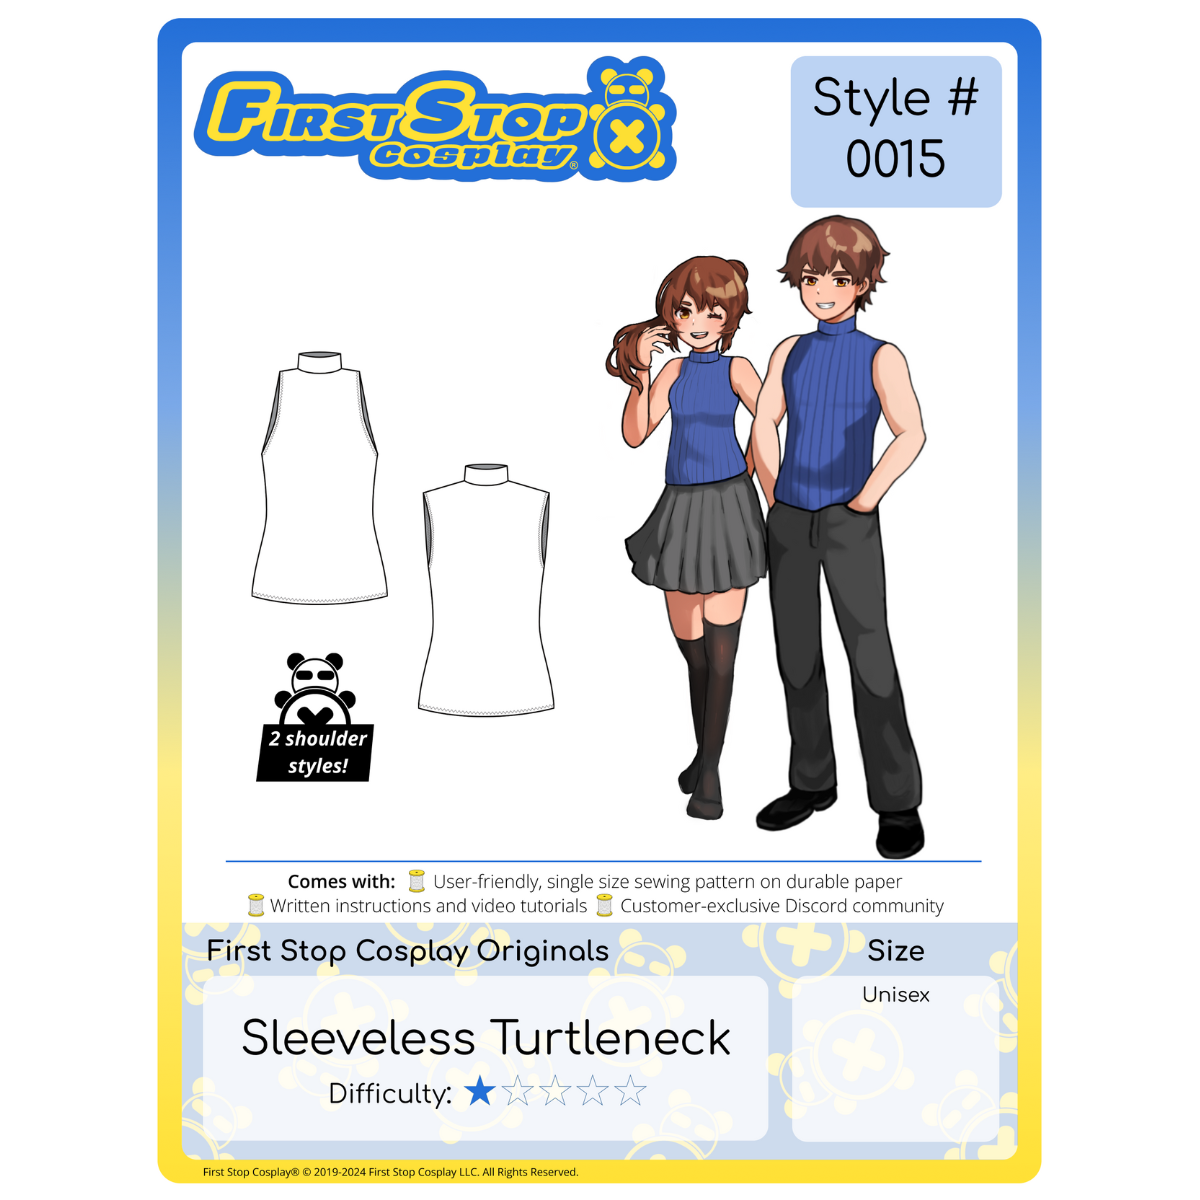 A graphic of the front packaging for Style #0015- Sleeveless Turtleneck. The First Stop Cosplay logo is in the top left corner. Below the logo is line art of the completed pattern. To the right is an image of our female & male characters, Pan & Dah, wearing the completed Sleeveless Turtleneck. Pan with the shorter shoulder option with a black skirt and Dah with the longer shoulder option with black pants. This pattern is 1 star in difficulty rating and follows our unisex size chart.